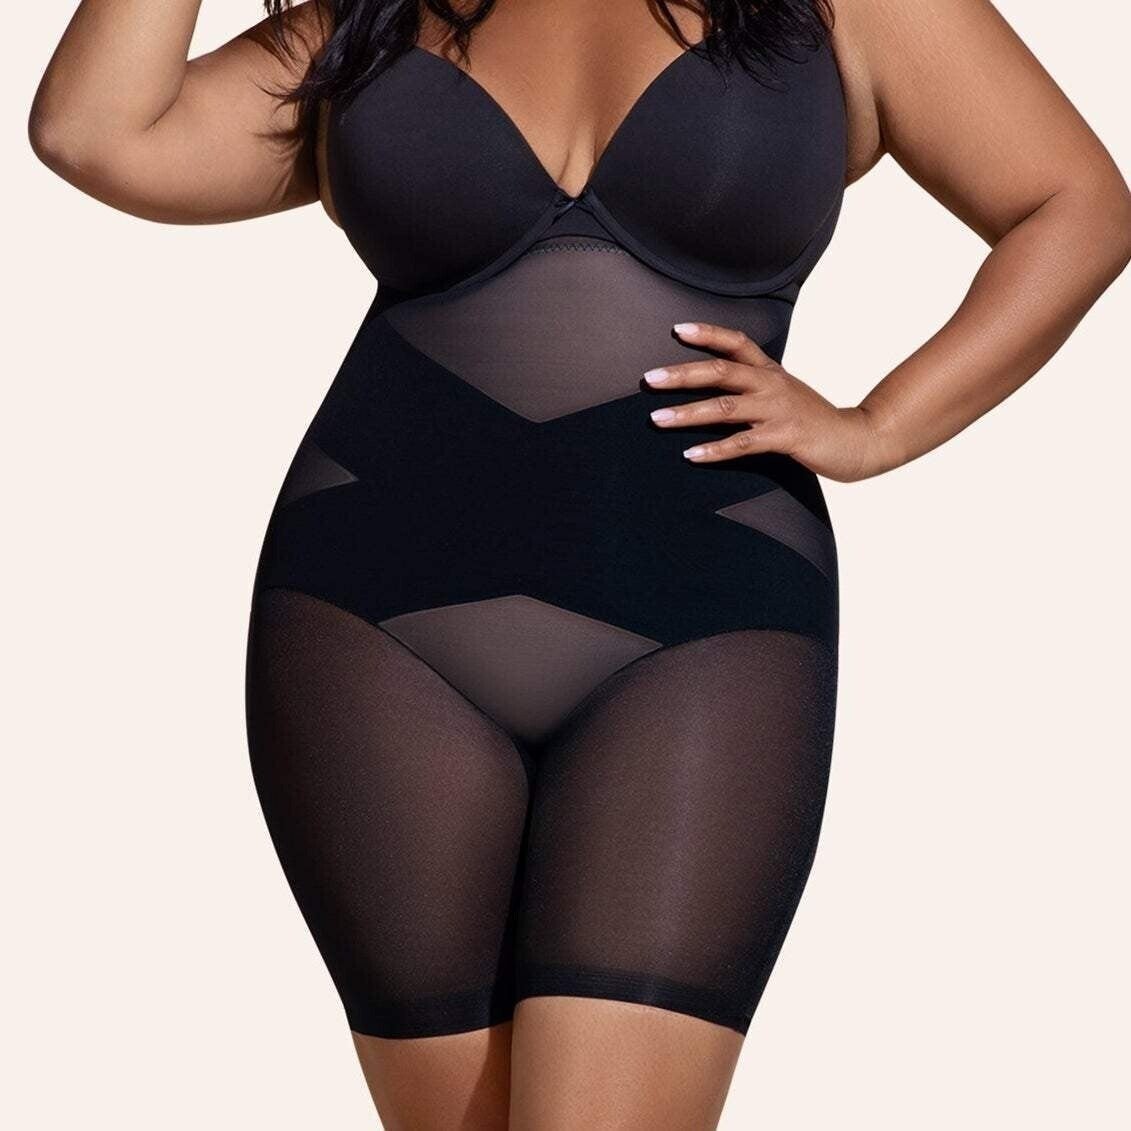 Get a Perfect Figure with Our Cross-Compression High Waisted Shaper - 49% Off for Summer Sale!